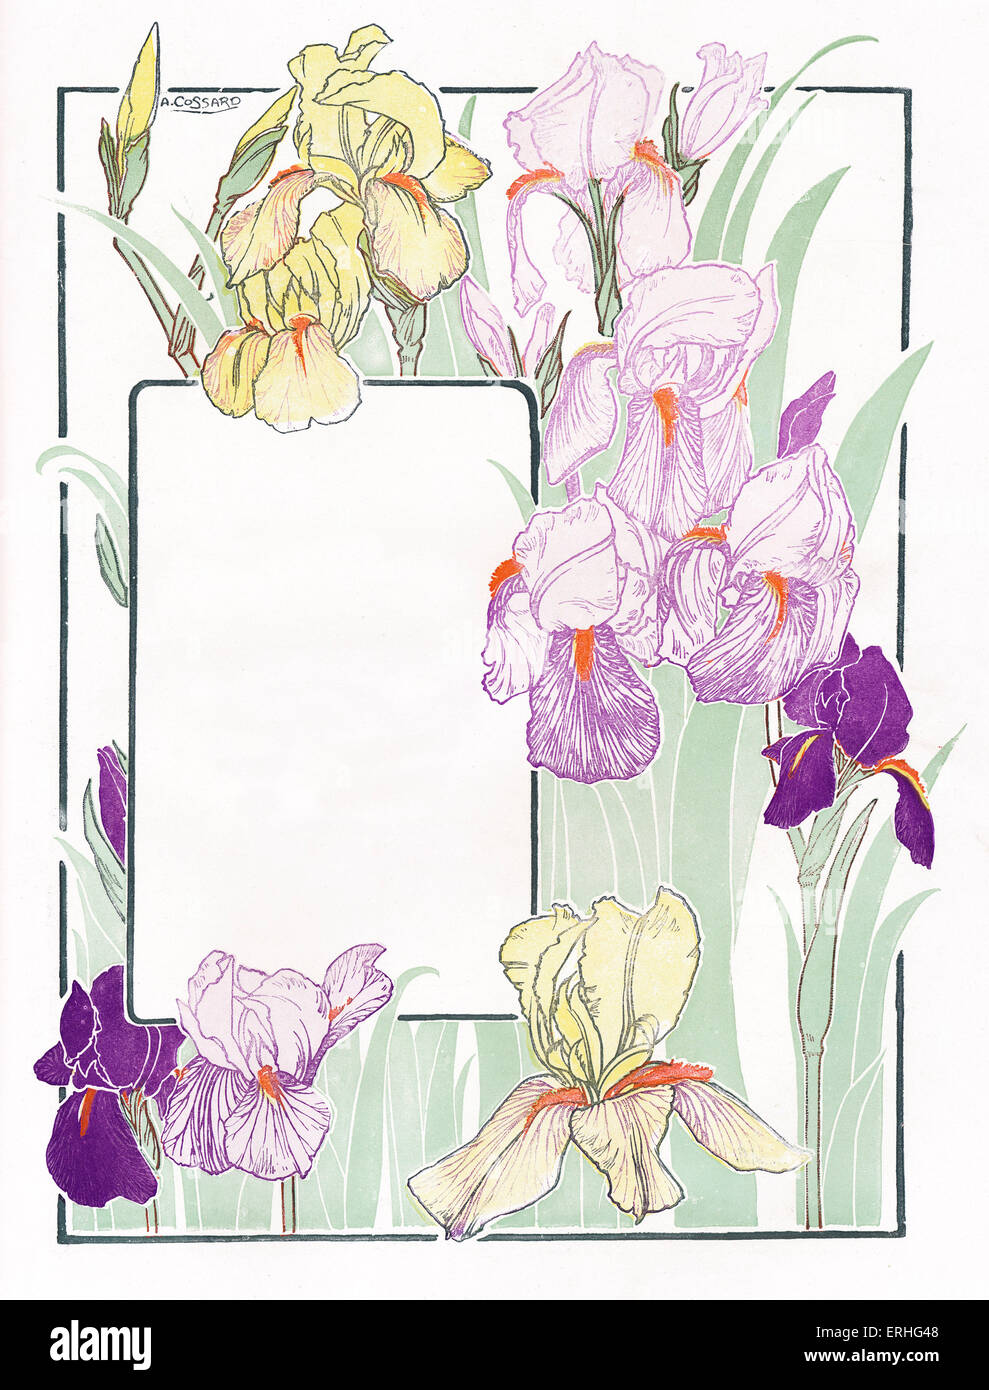 Floral border - to enclose, border or surround text with Spring flowers. Suitable for title page, ex libris, greeting card, Stock Photo